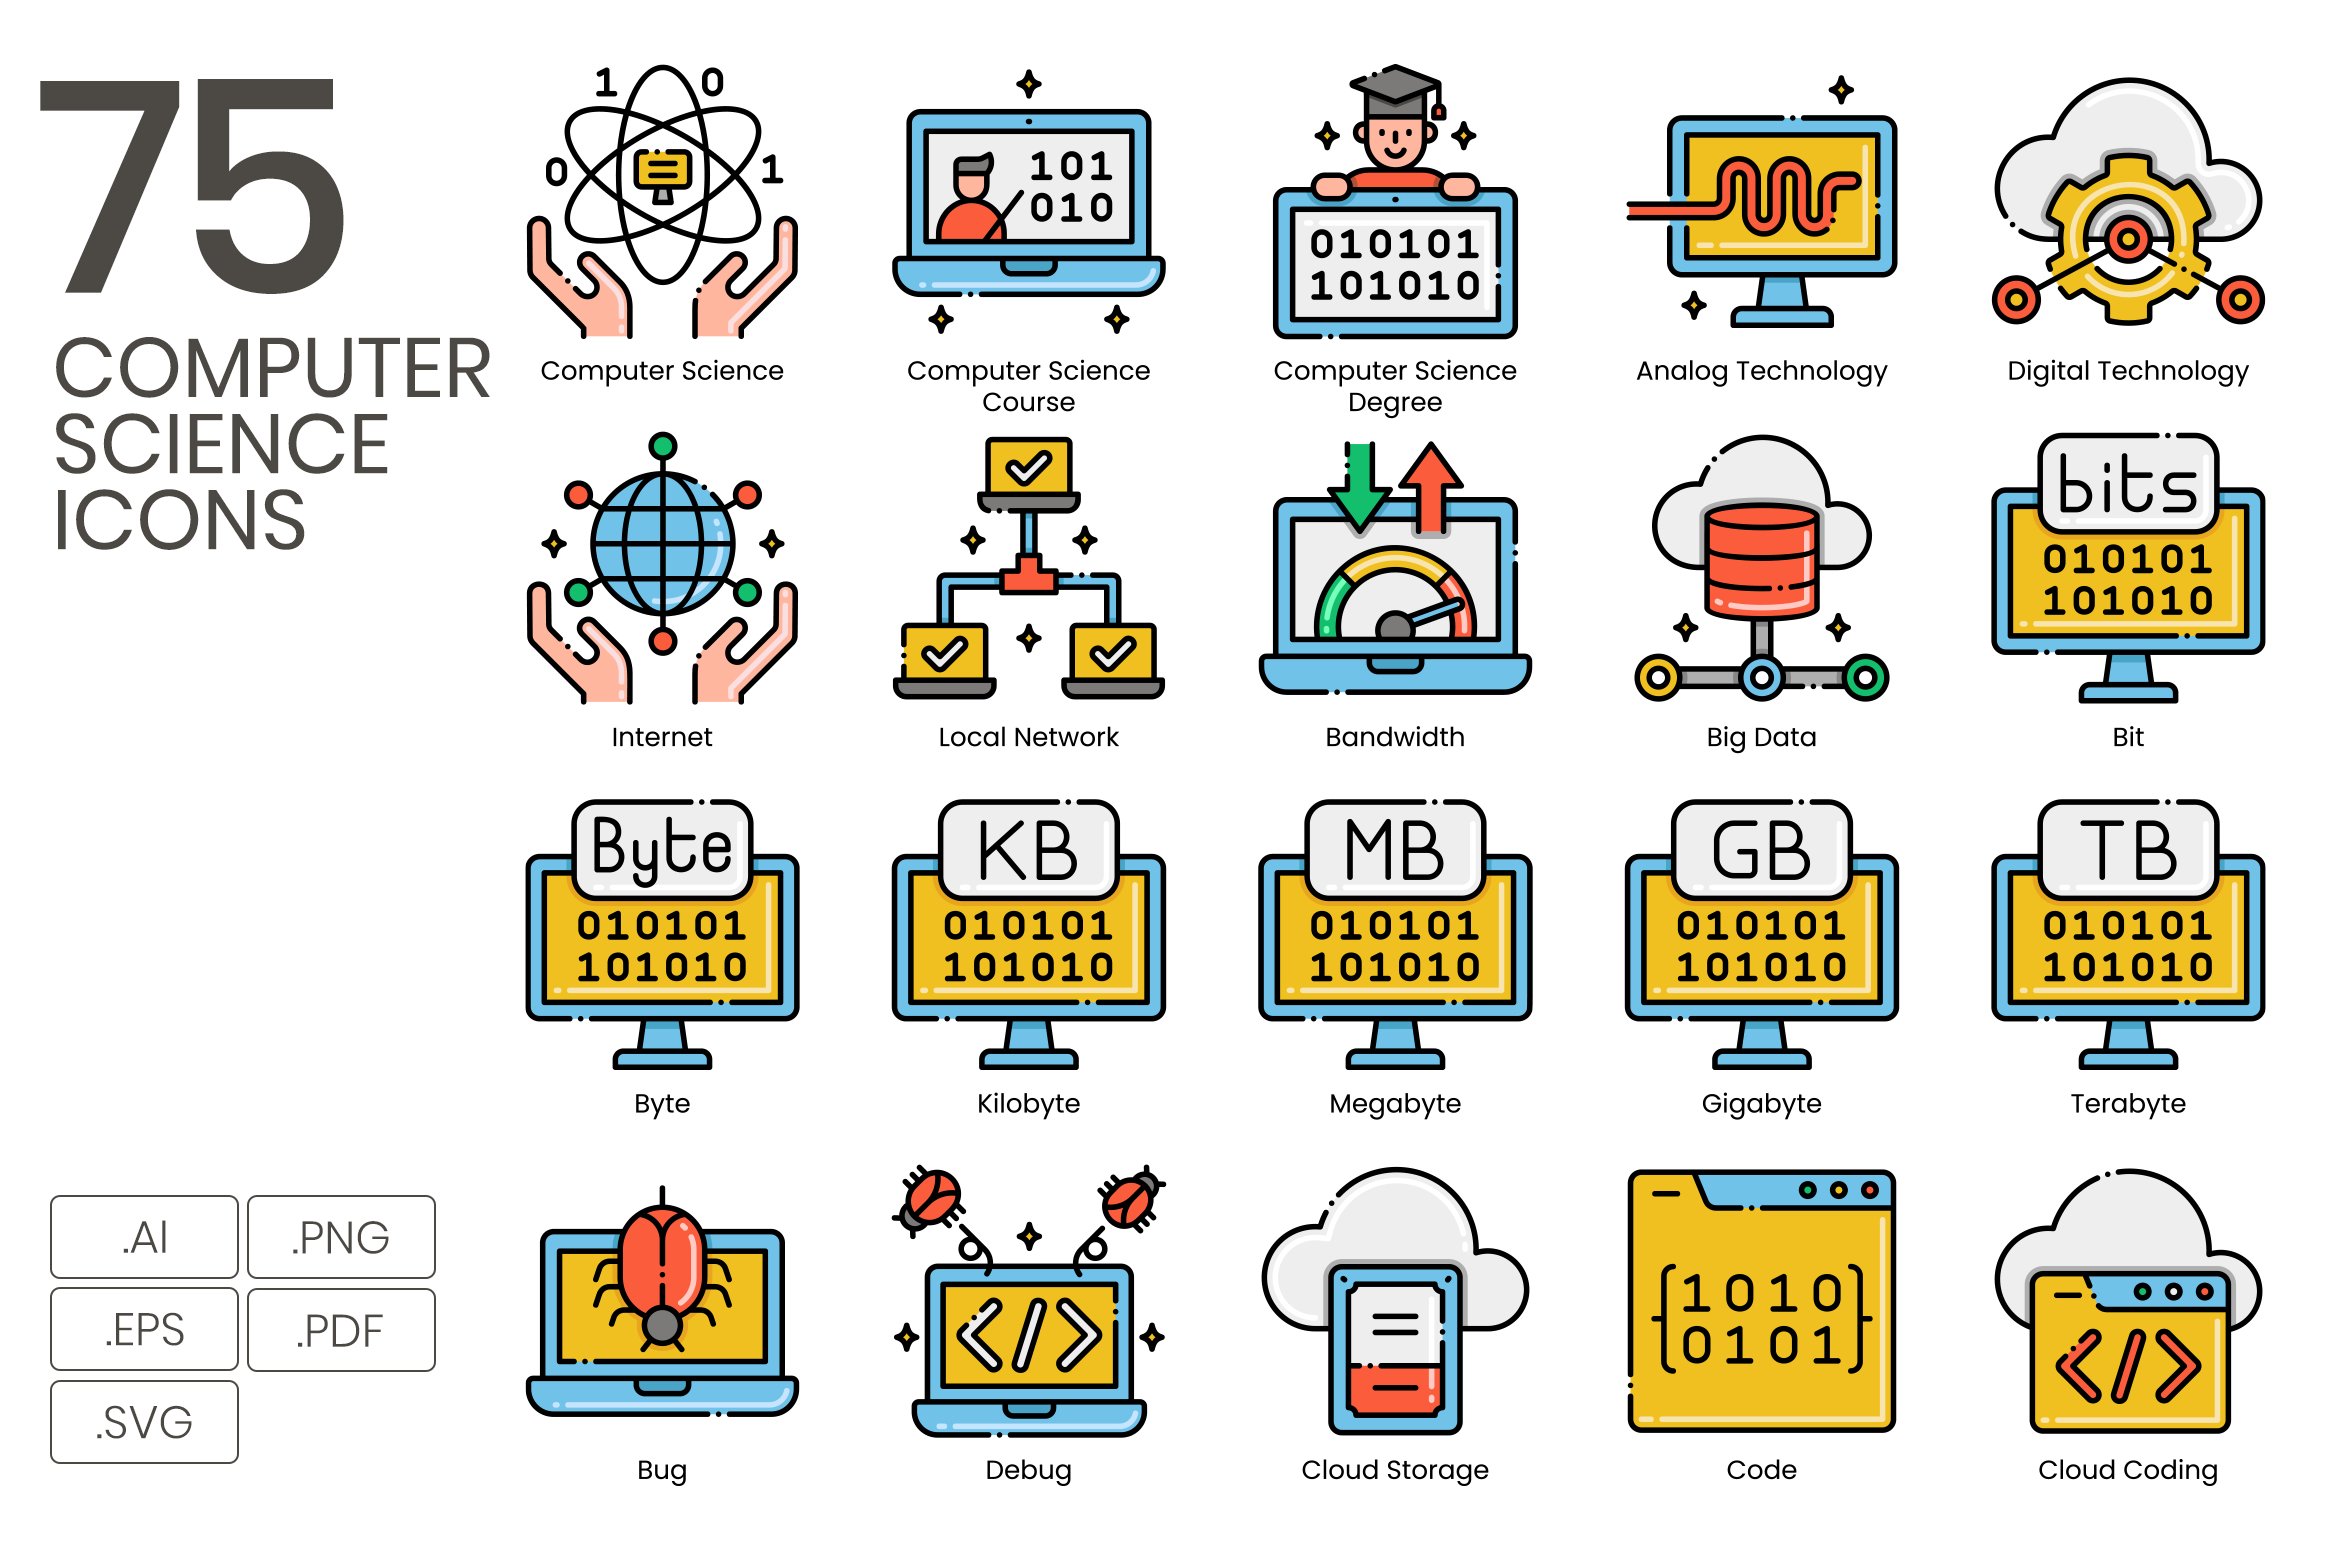 75 Computer Science Icons | Aestheti cover image.